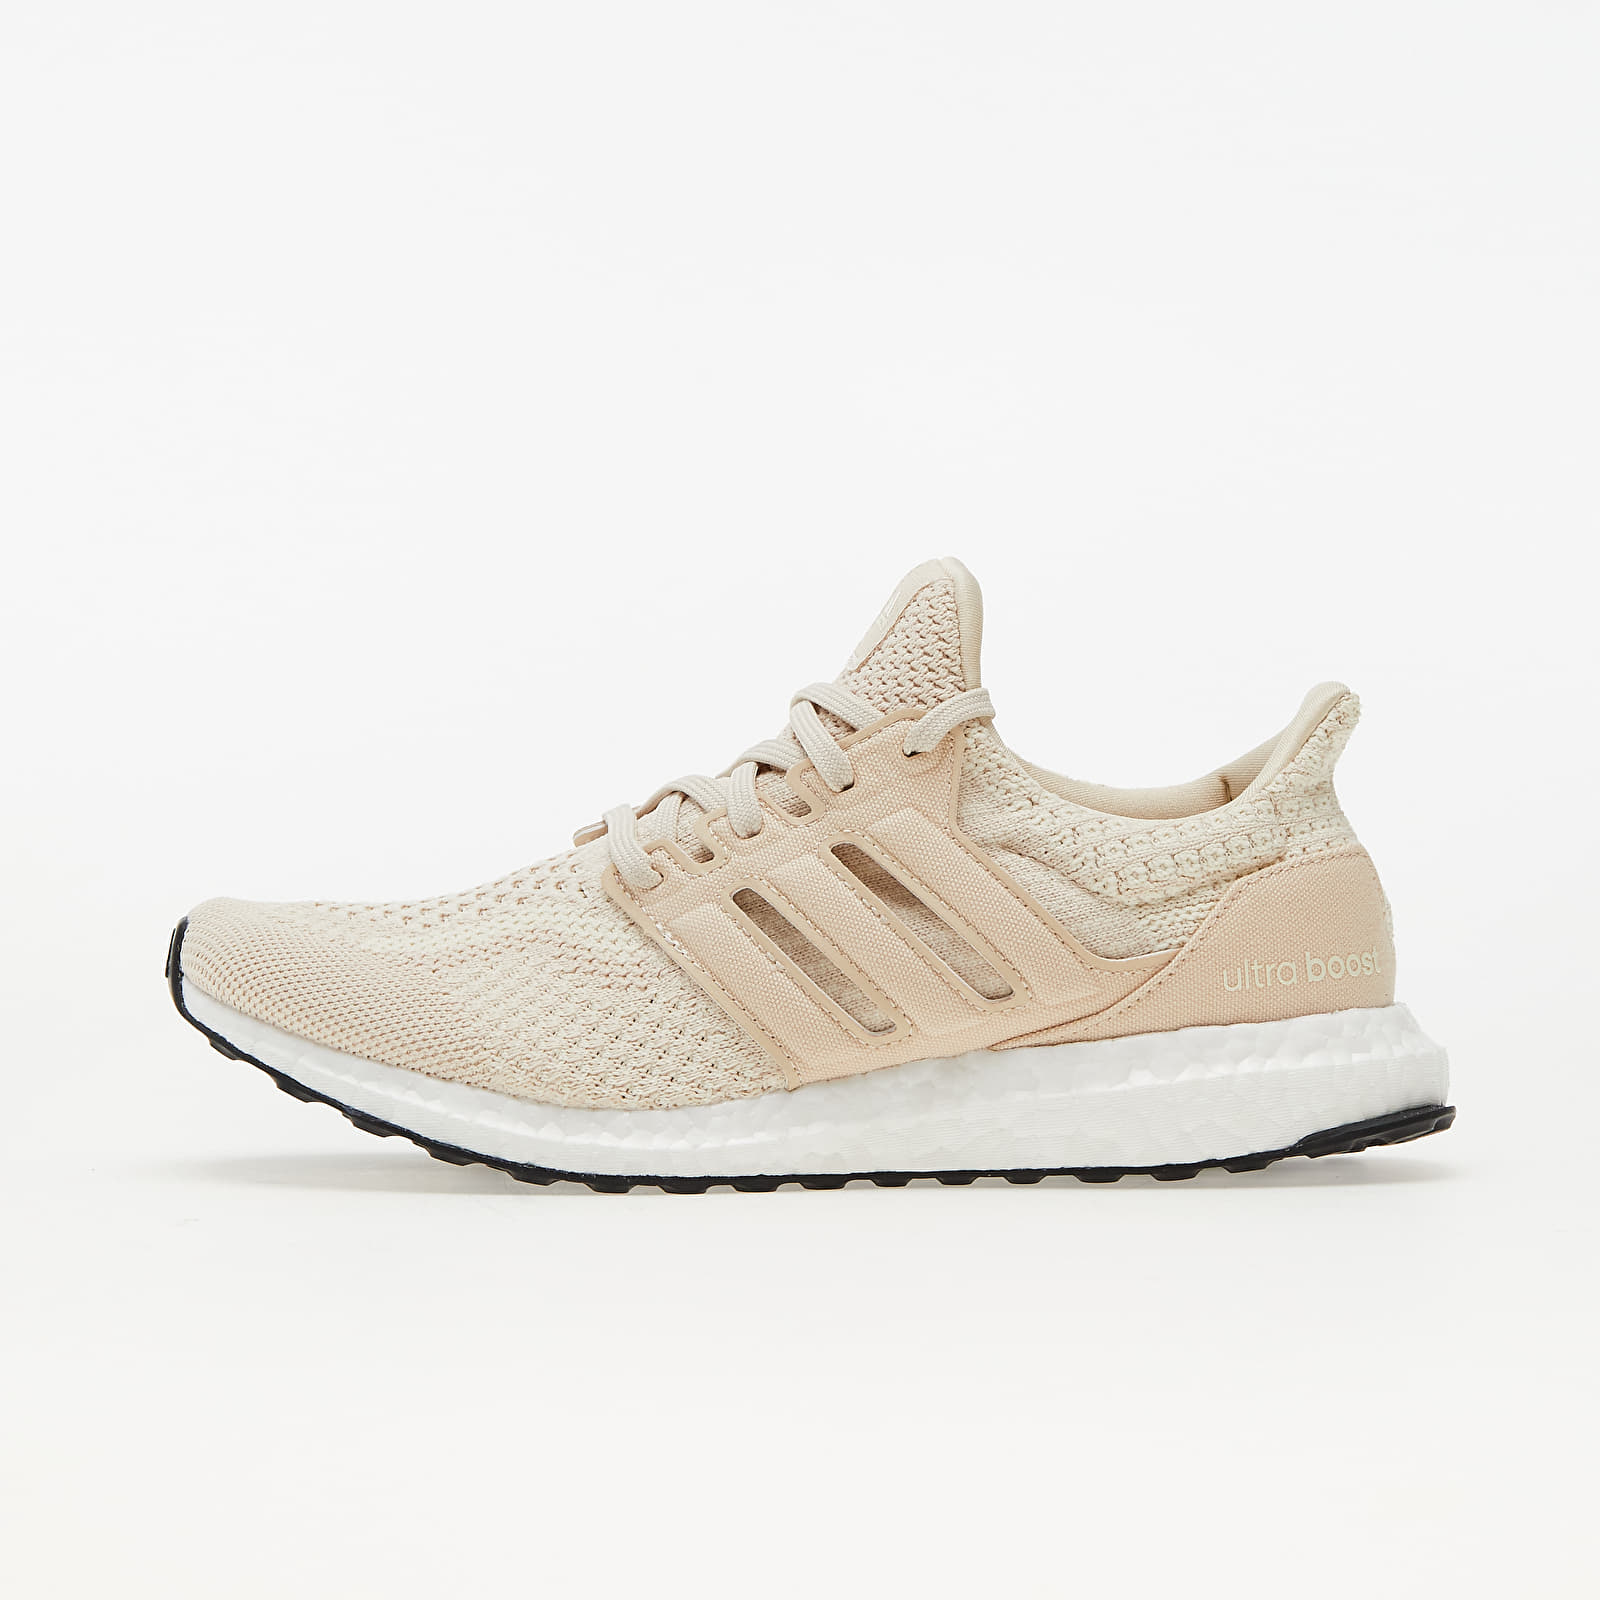 Women's shoes adidas UltraBOOST 5.0 DNA Halo Ivory/ Halo Ivory/ Core White